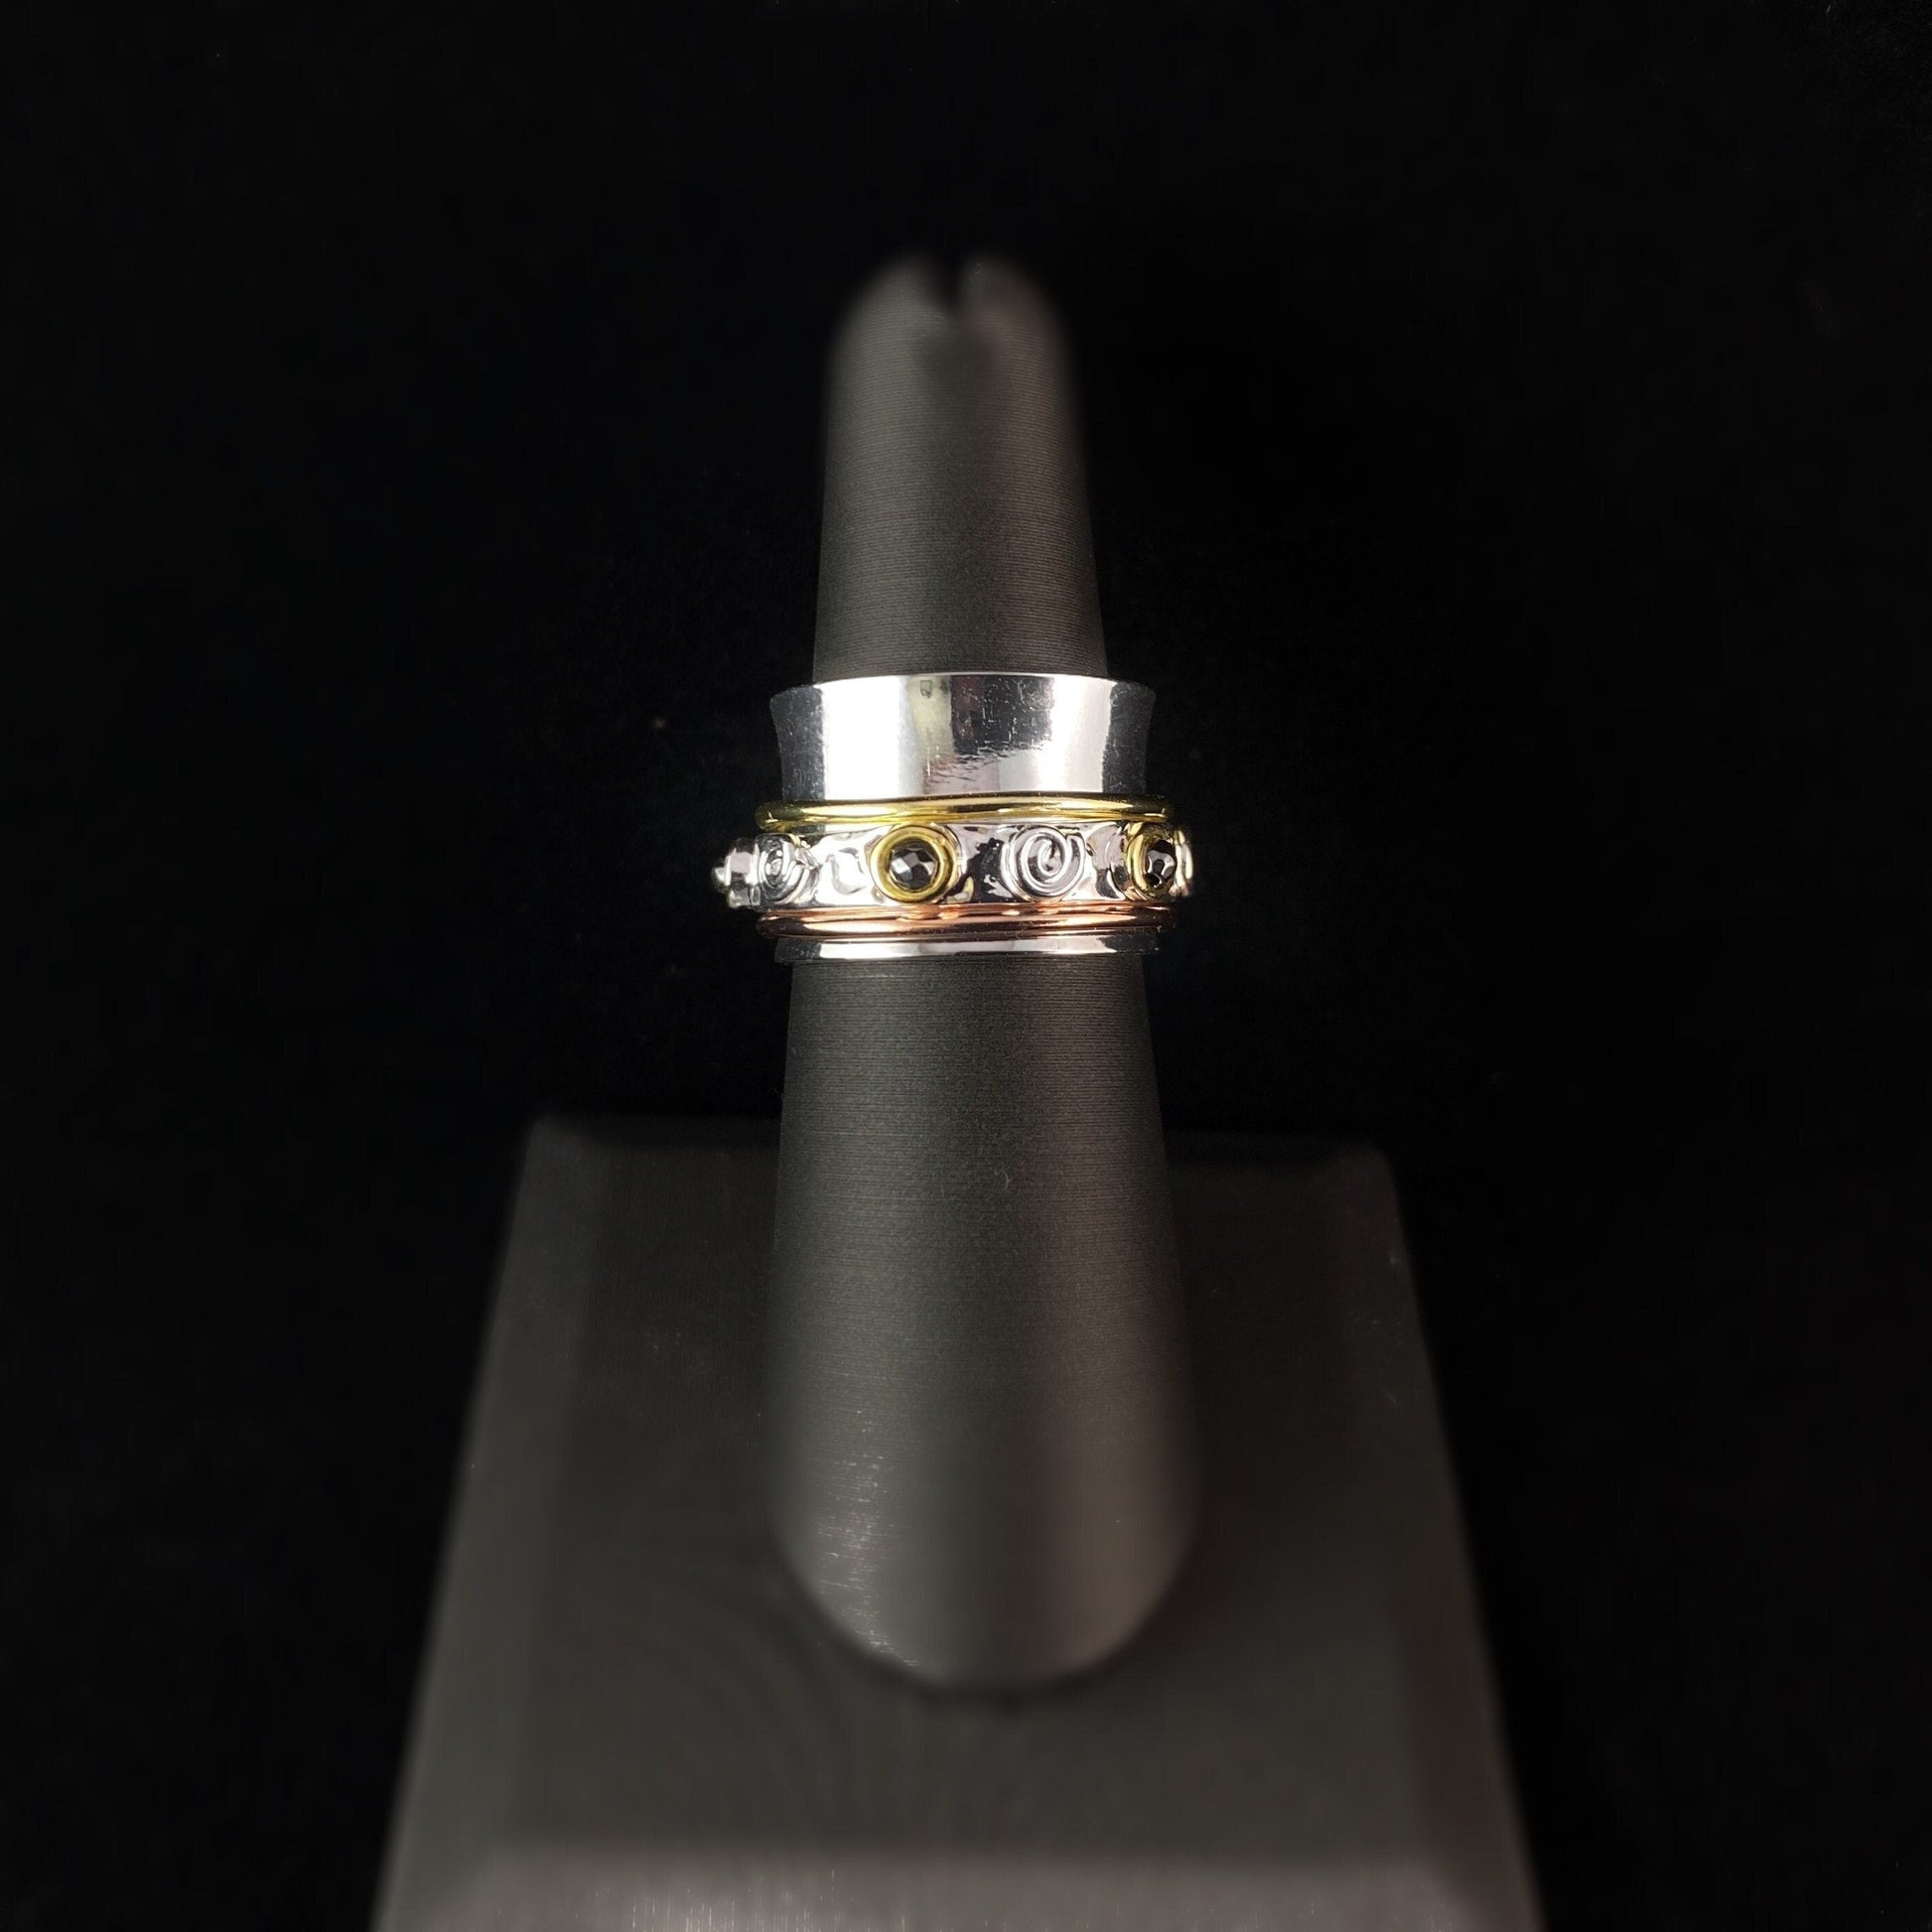 Tri-Color Fidget Ring with Hematite Stones, 14k Gold Plated Spinners, and Hammered Sterling Silver Plated Detailing, Size 7